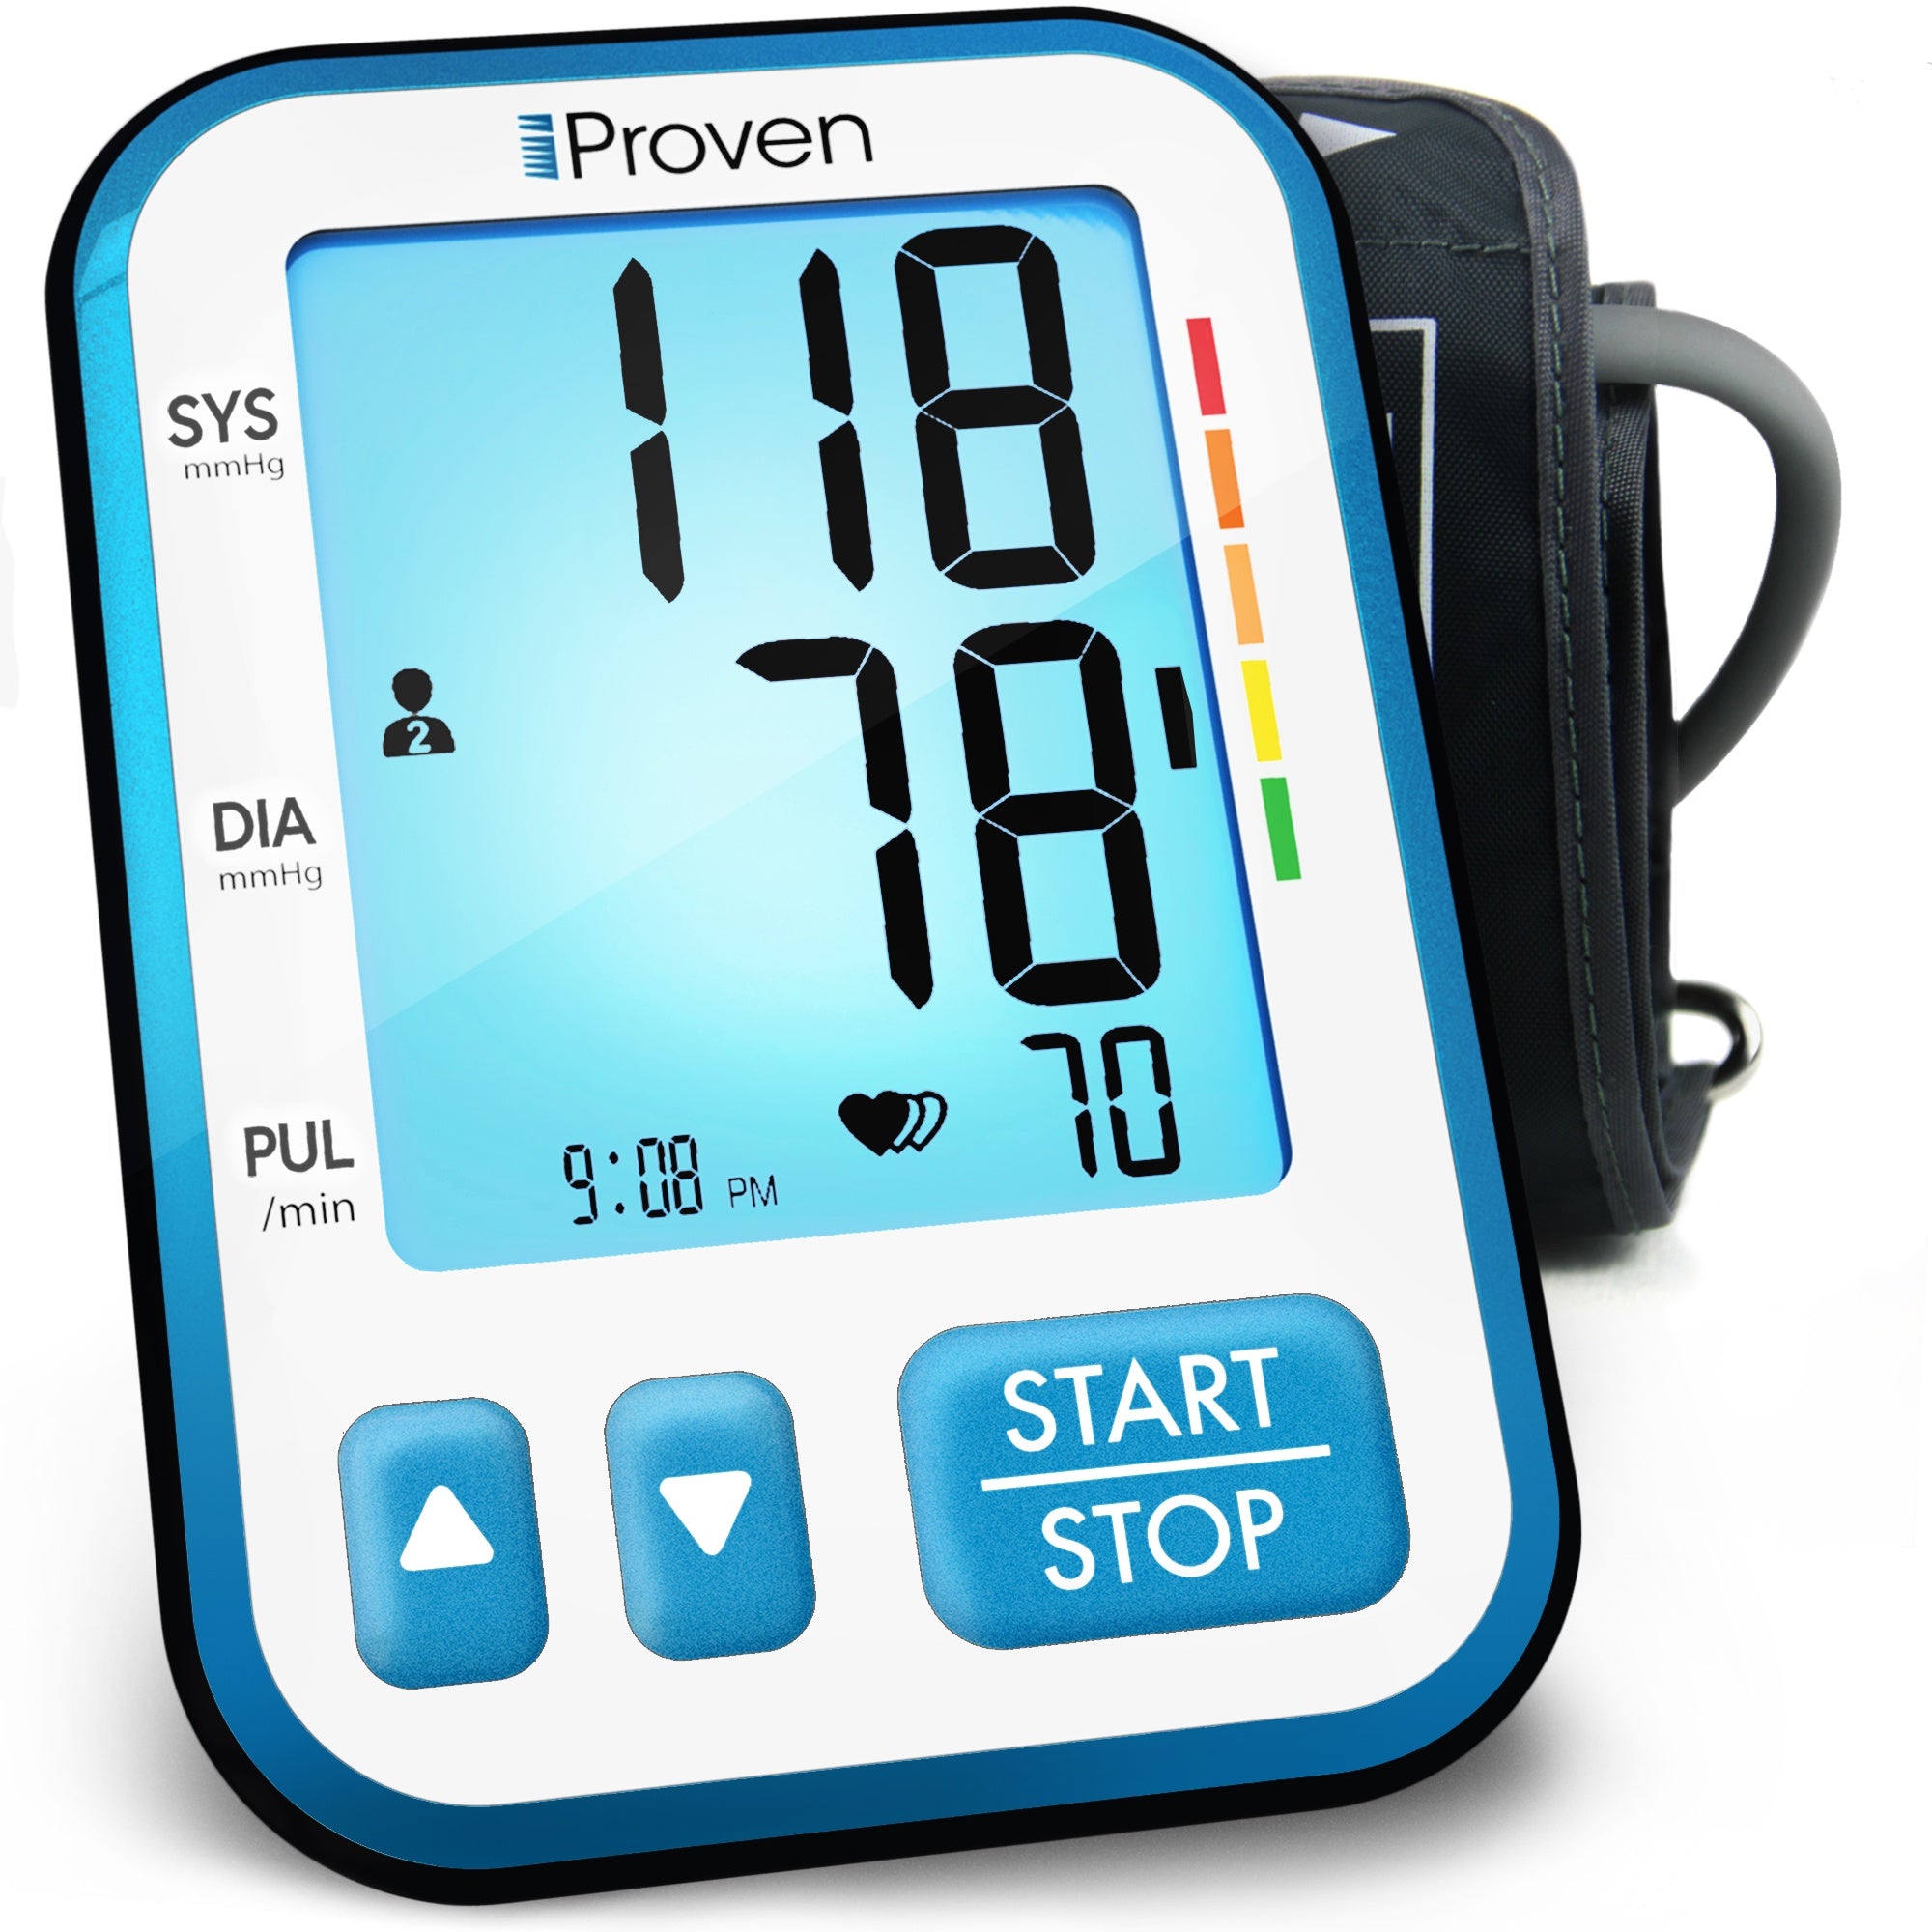 IPROVEN Upper Arm Blood Pressure Machine, Easy to Use, Backlit Display, Large  Cuff Adjustable 8 - 16 inch, Automatic & Accurate Blood Pressure Monitor  for Home Use - BPM-656